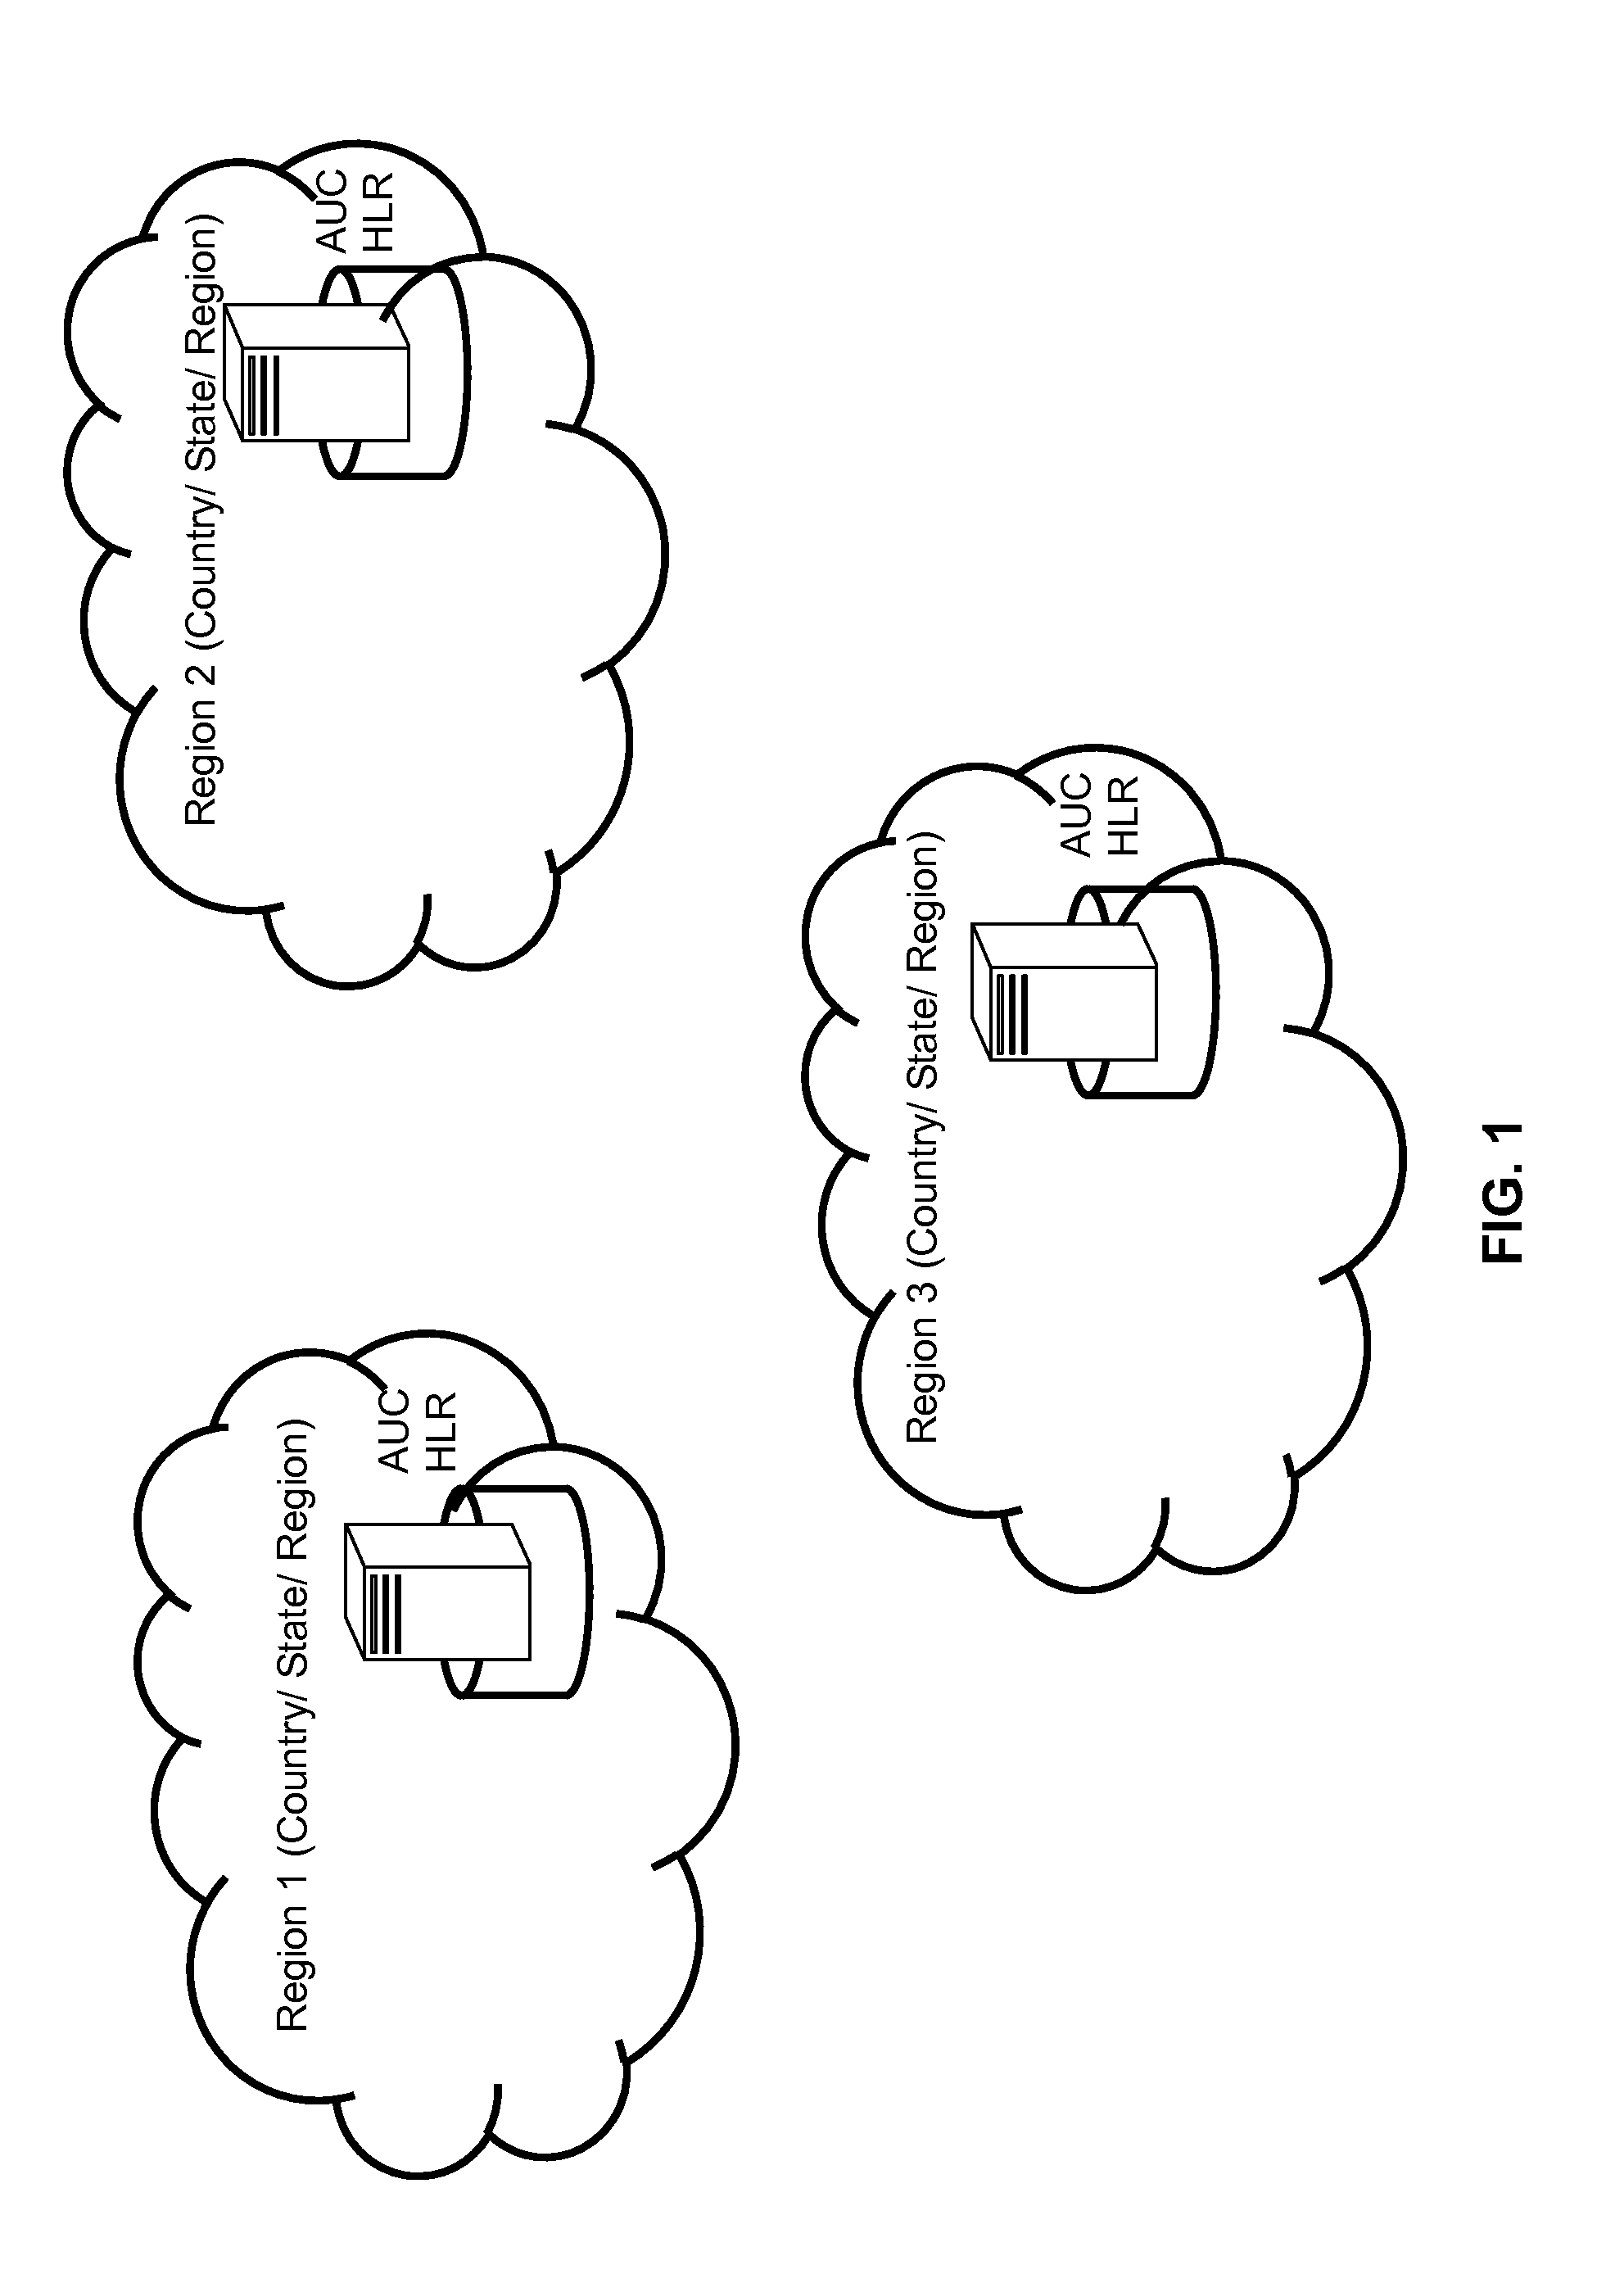 Method and system for providing services to mobile communication subscribers